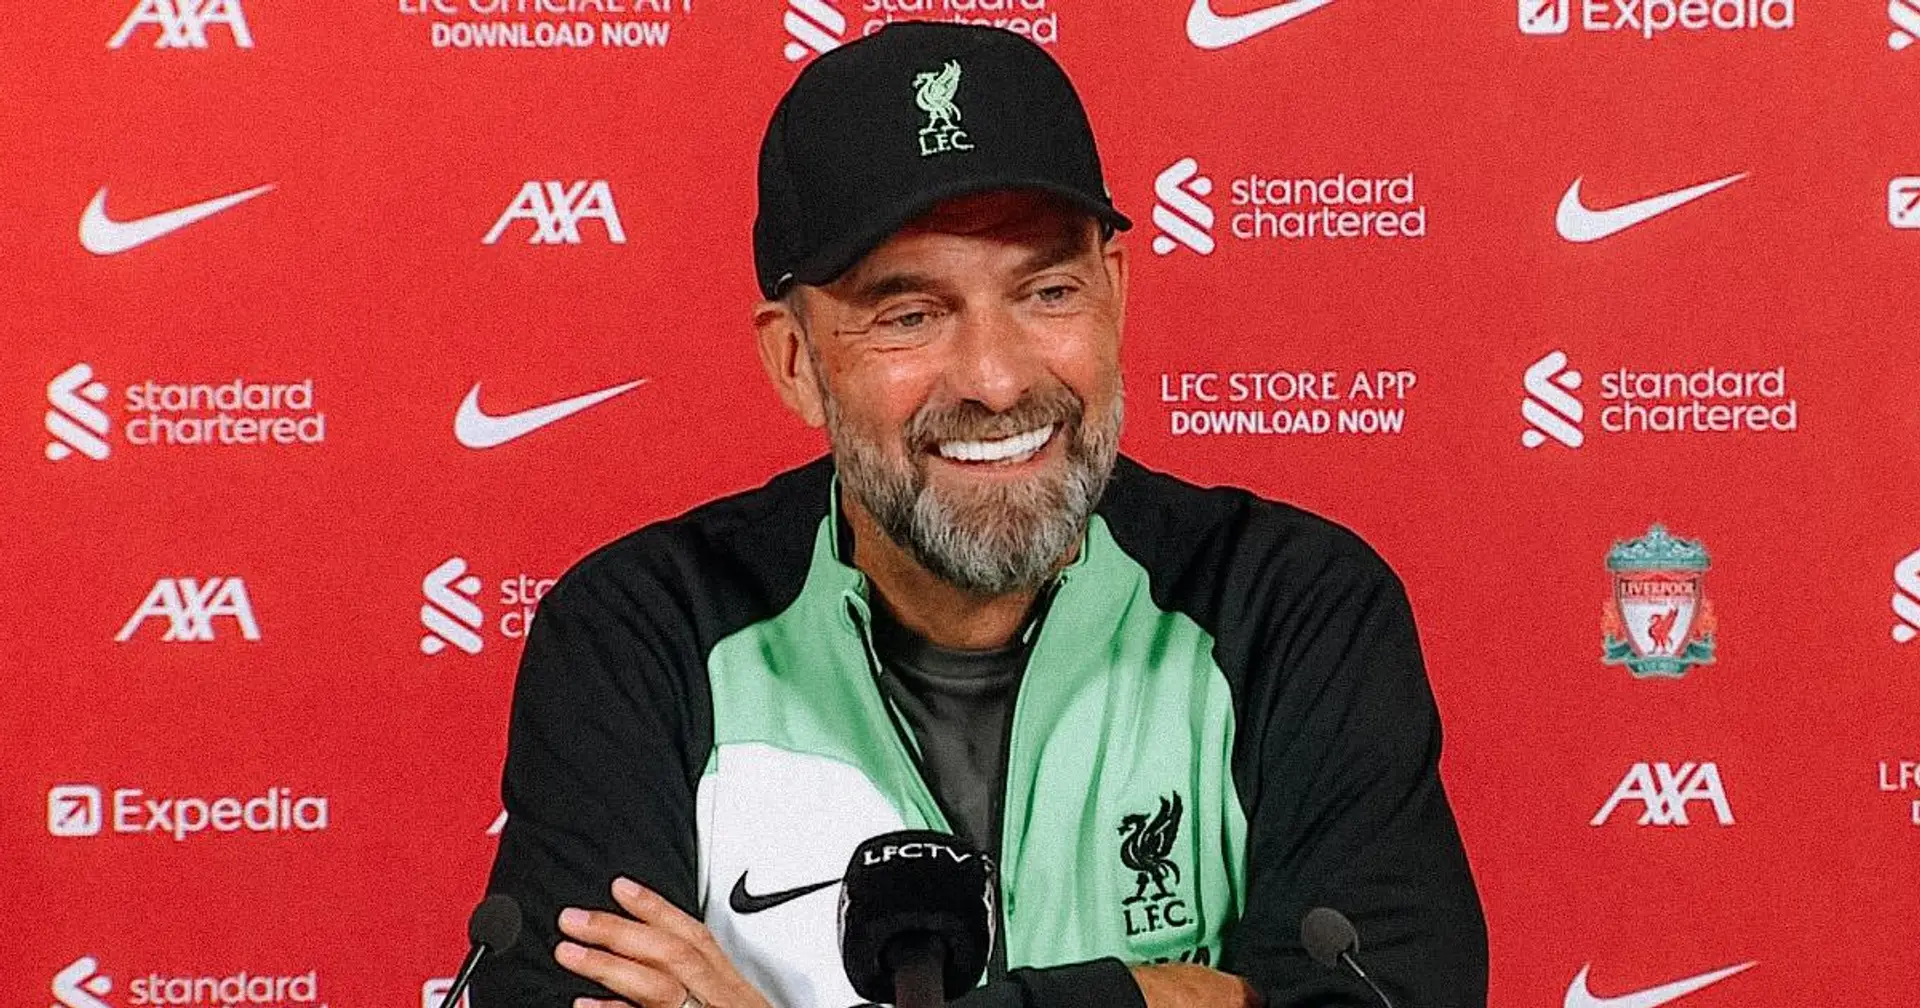 'My heart is here': Klopp insists he's committed to building Liverpool 2.0